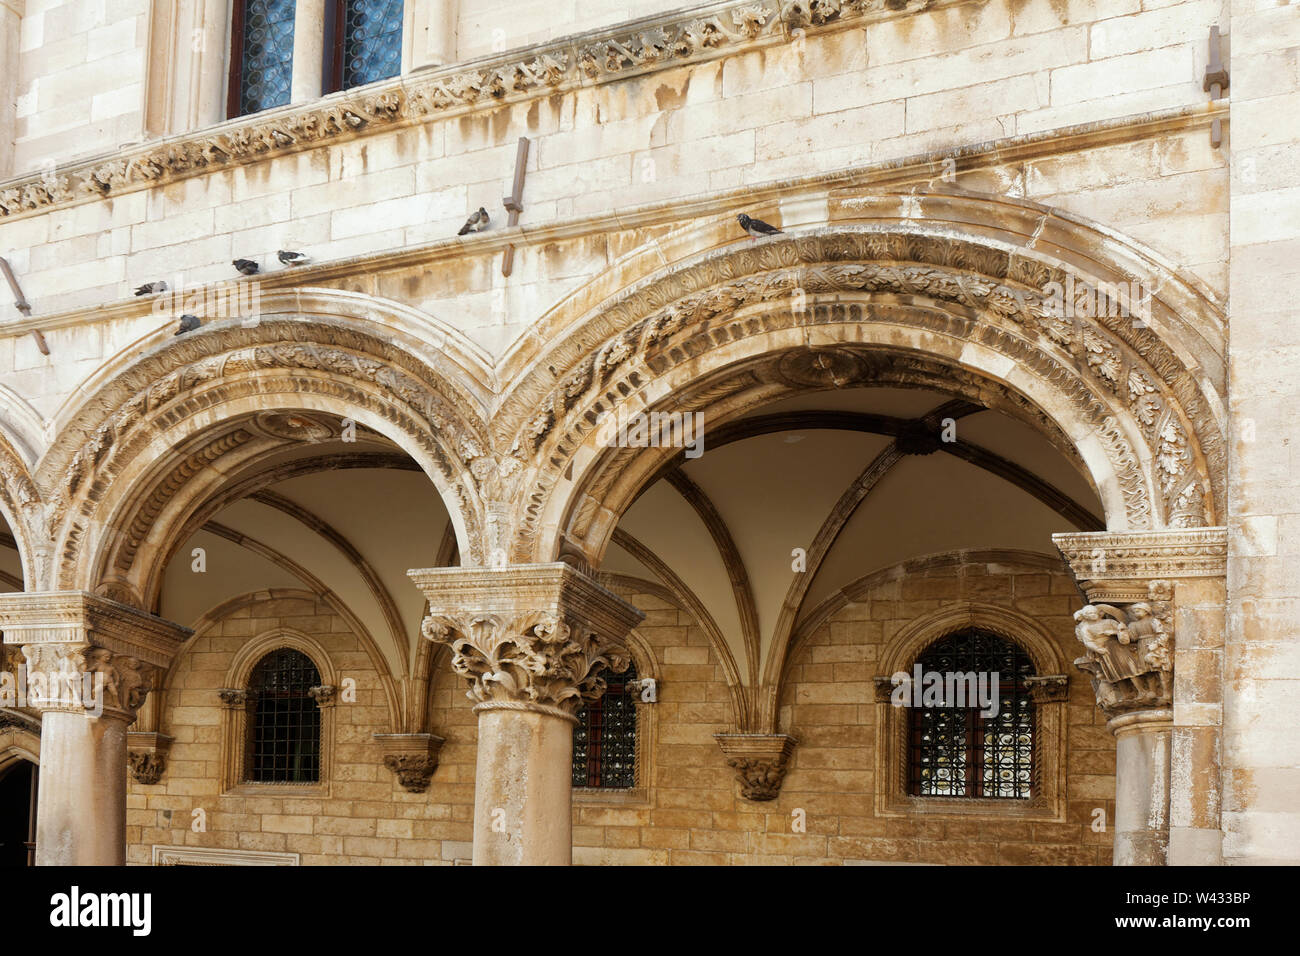 ornate arches; Rector's Palace; 15th century; Gothic; Renaisance; Baroque; now Cultural History Museum; Old Town; Dubrovnik; Croatia; horizontal Stock Photo